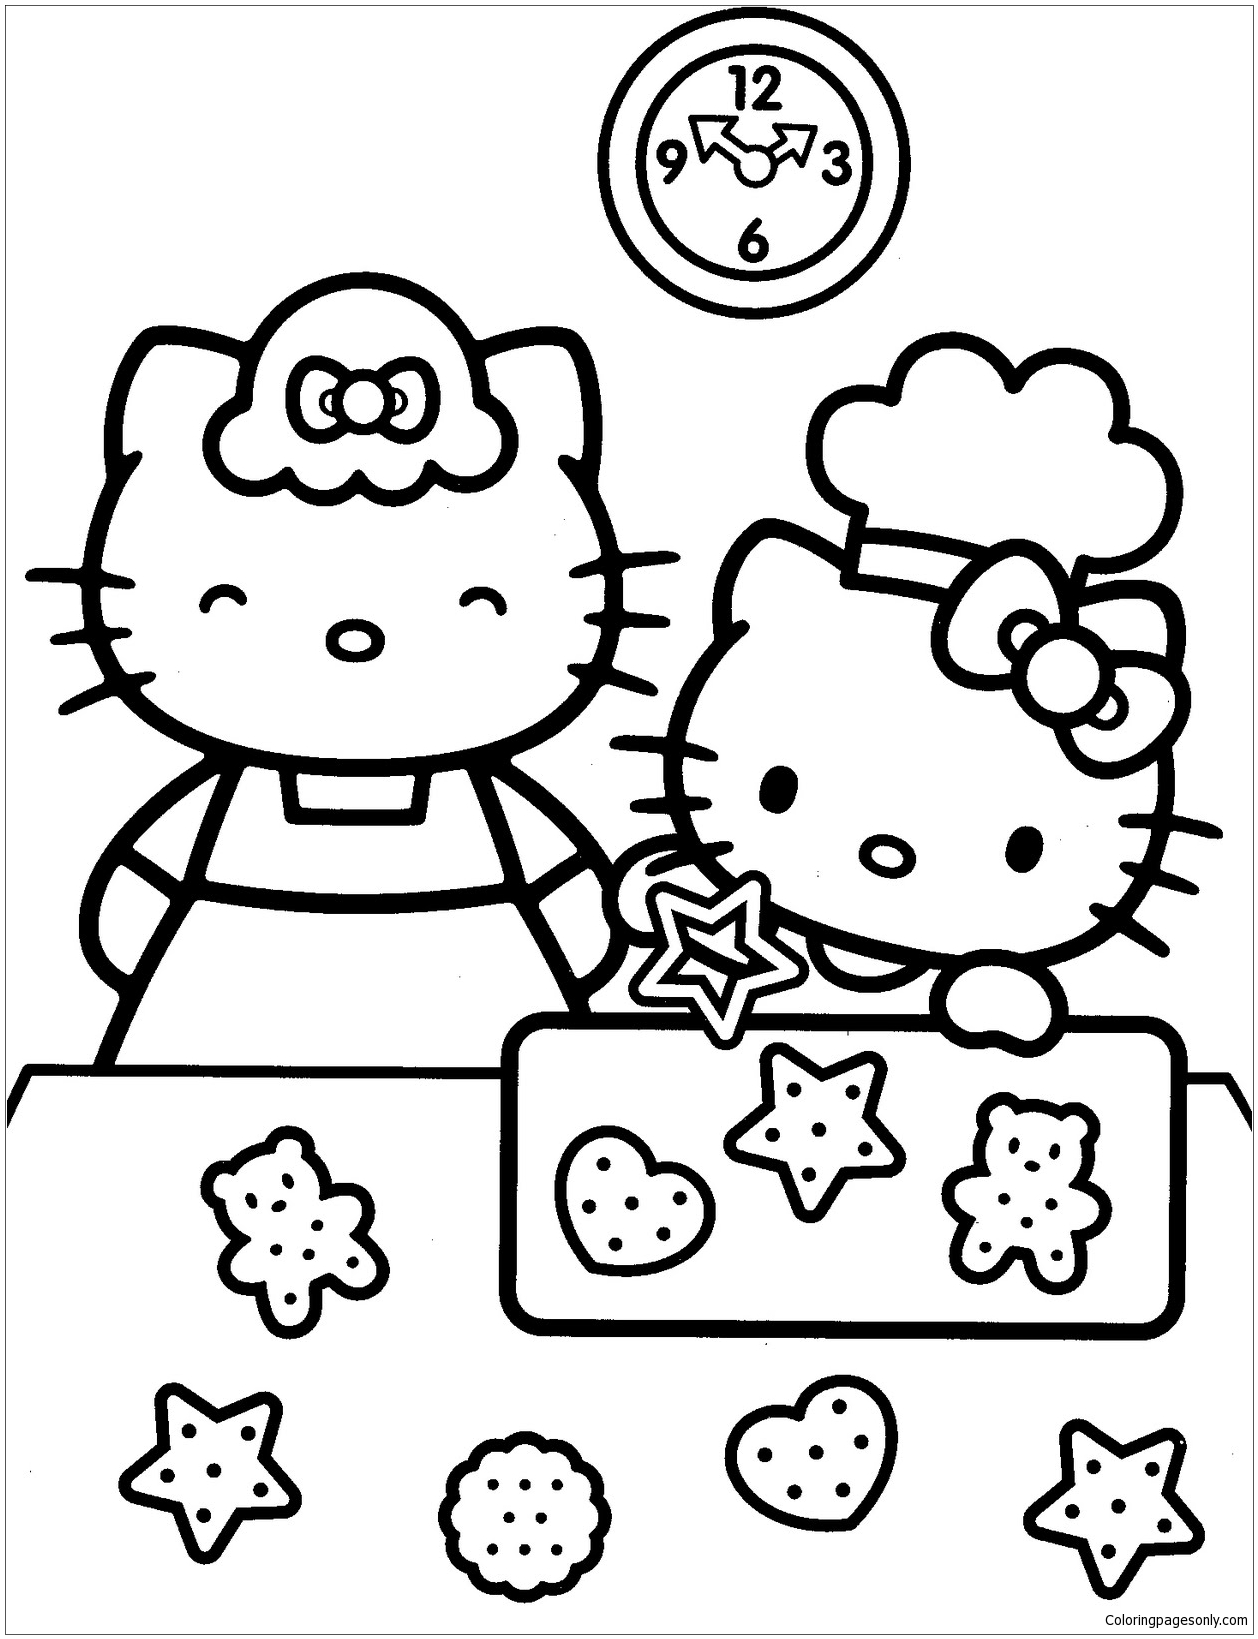 Hello Kitty Learning To Make Bake Cakes With Her Mother Coloring Page